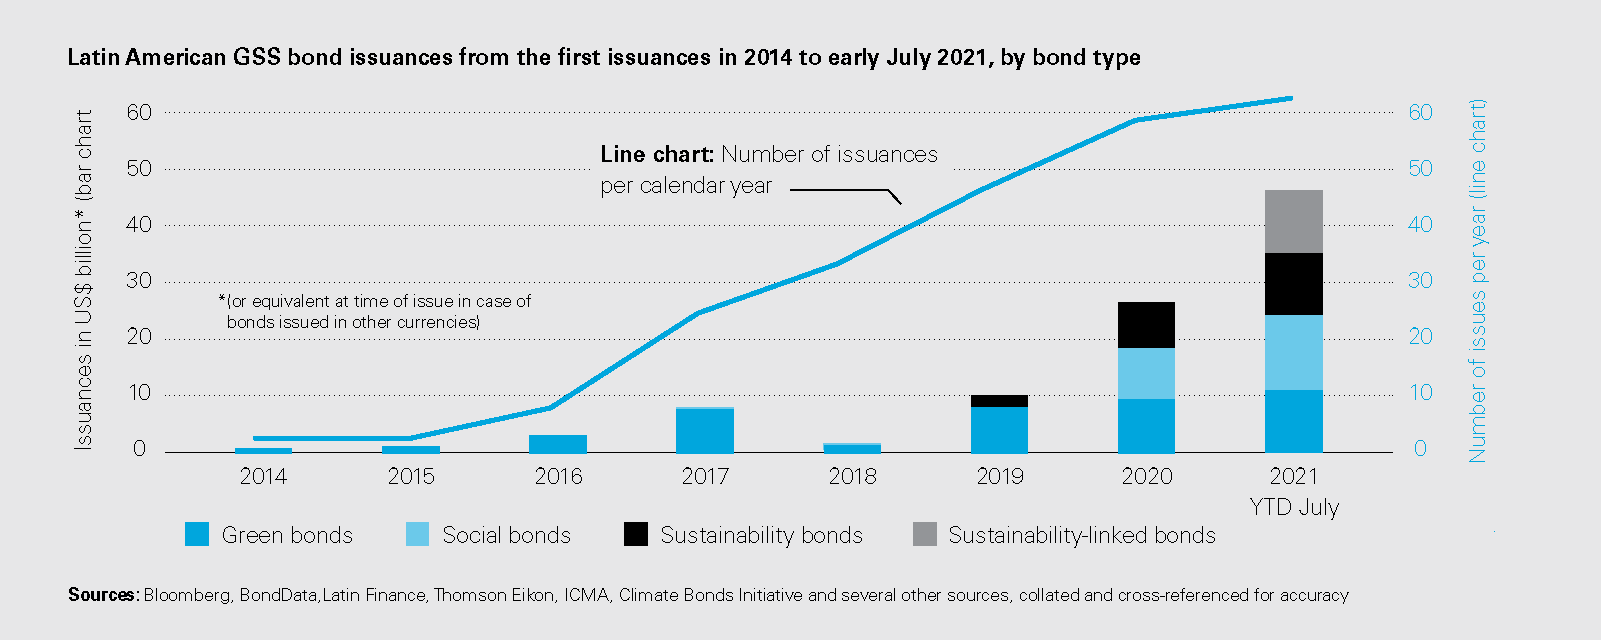 Latin American GSS bond issuances from the first issuances in 2014 to early July 2021, by bond type